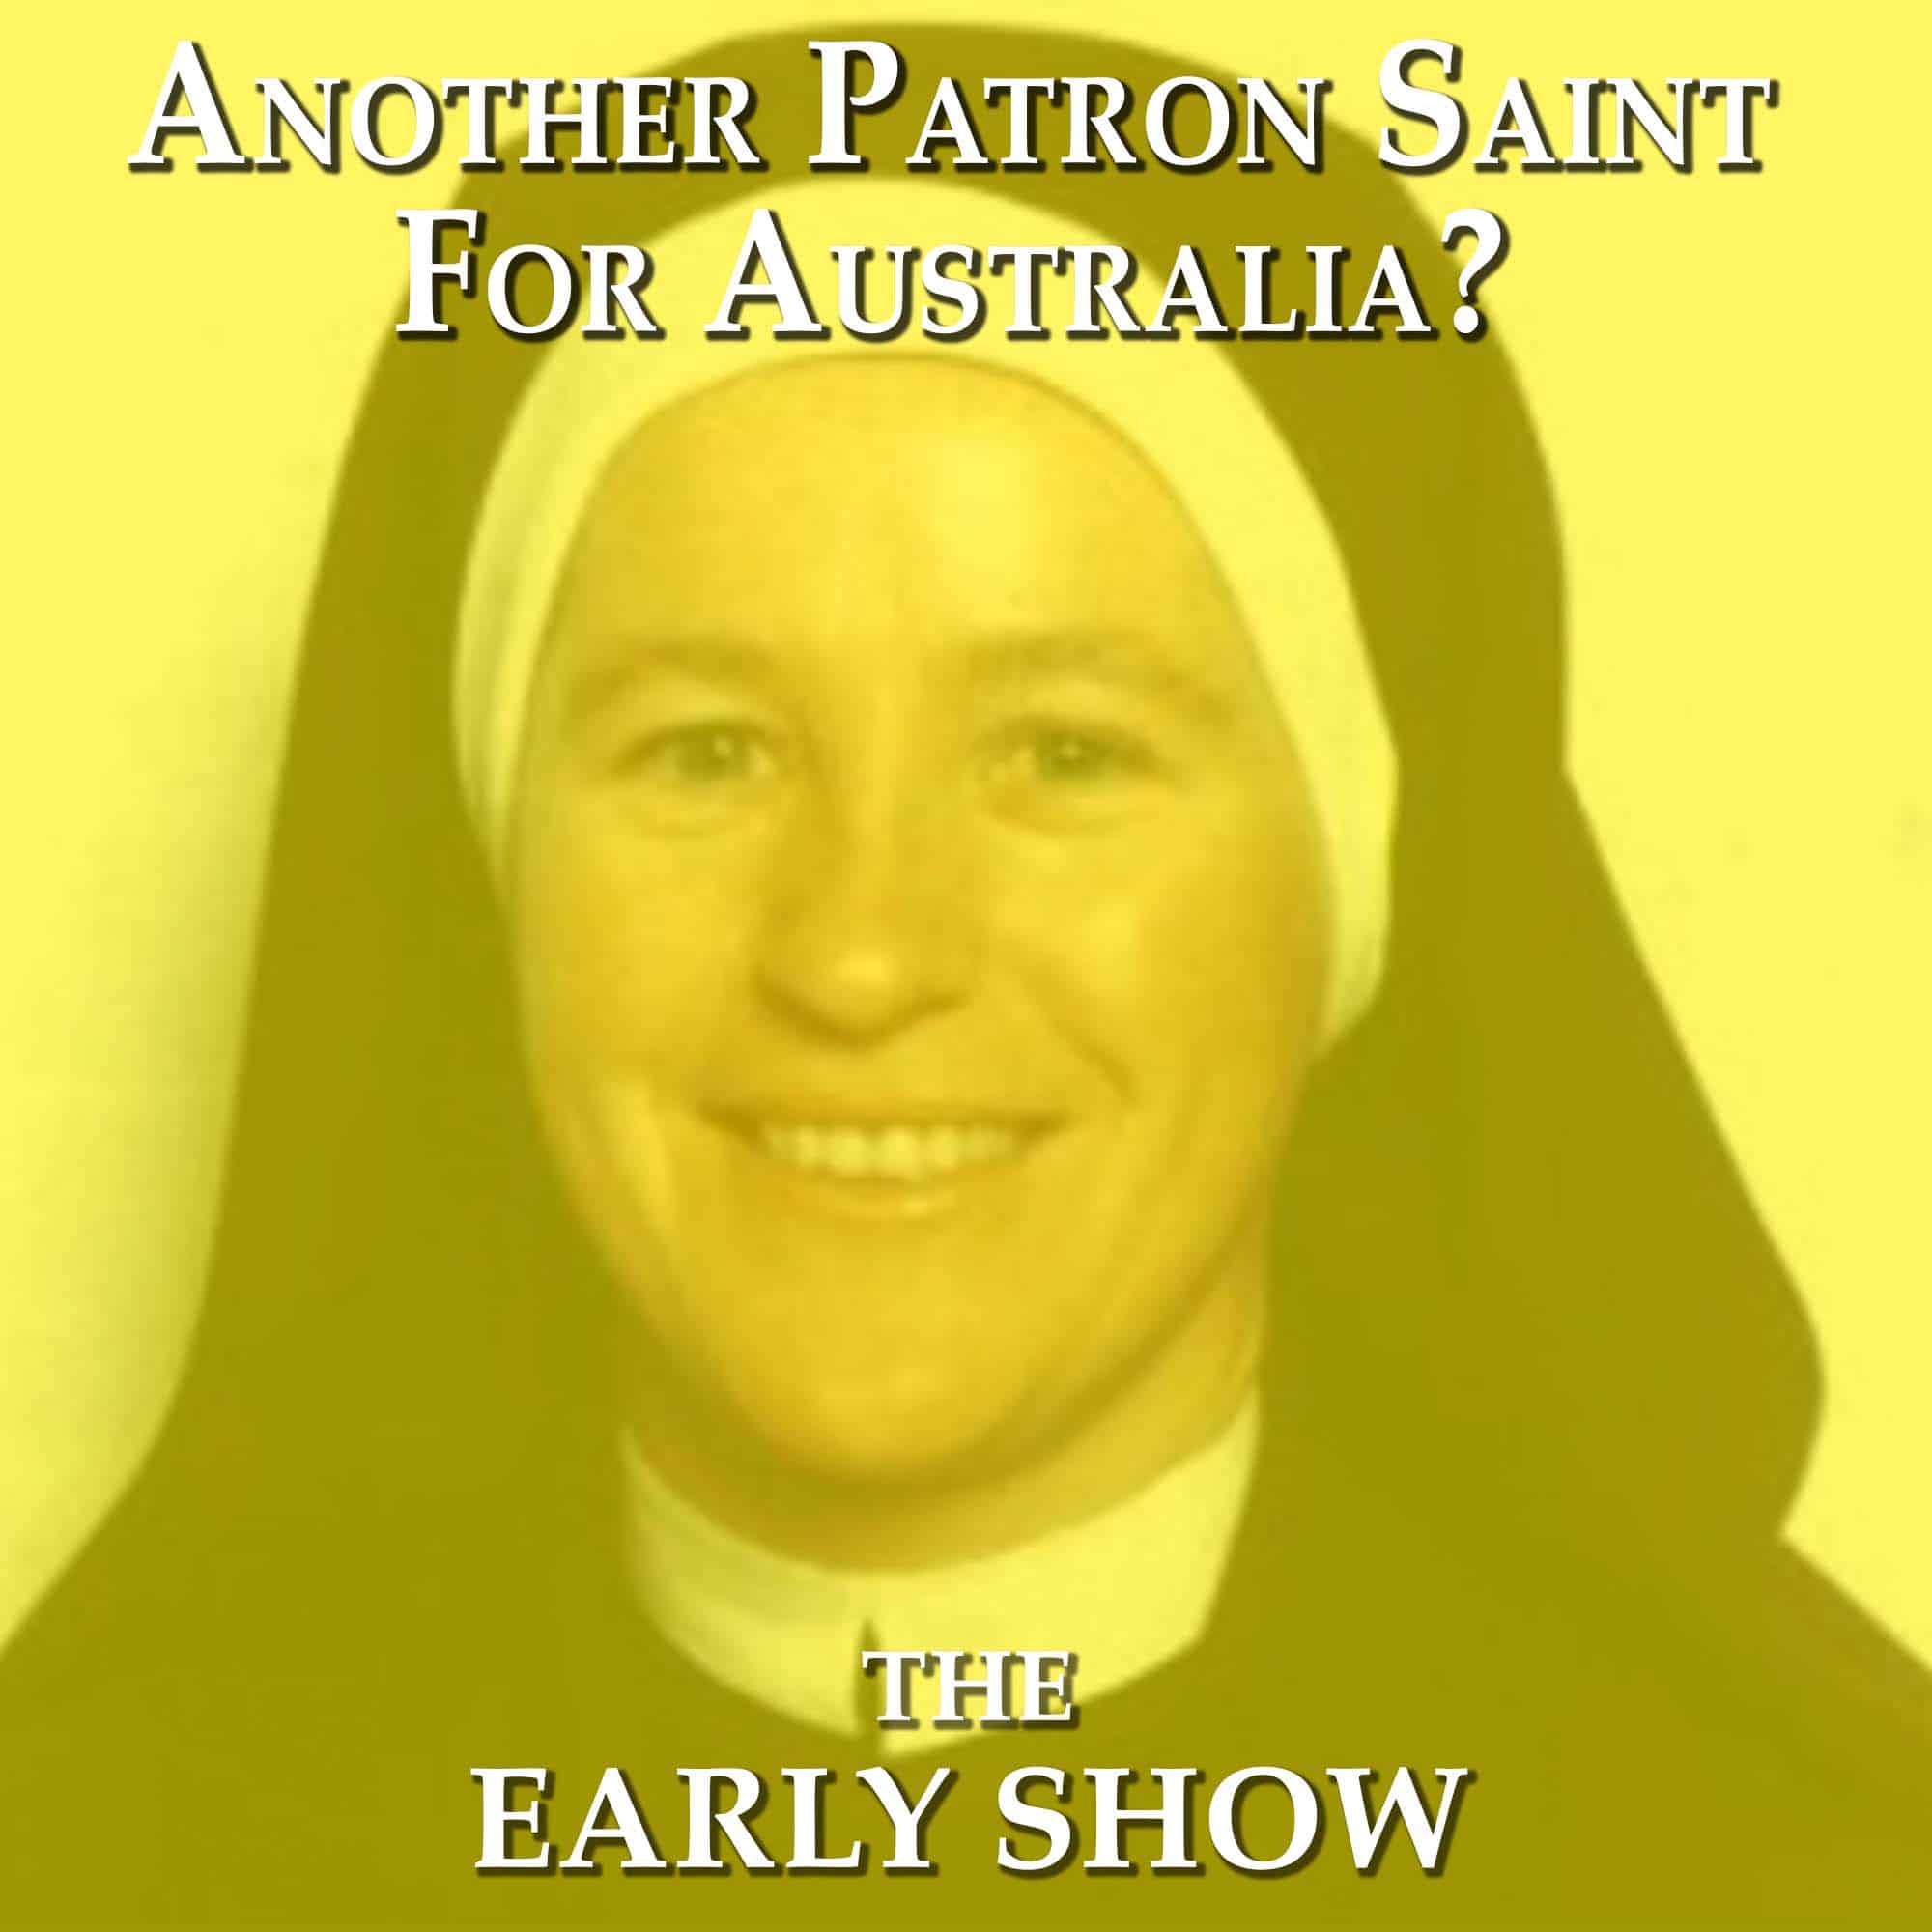 The Early Show-Another Patron Saint For Australia?